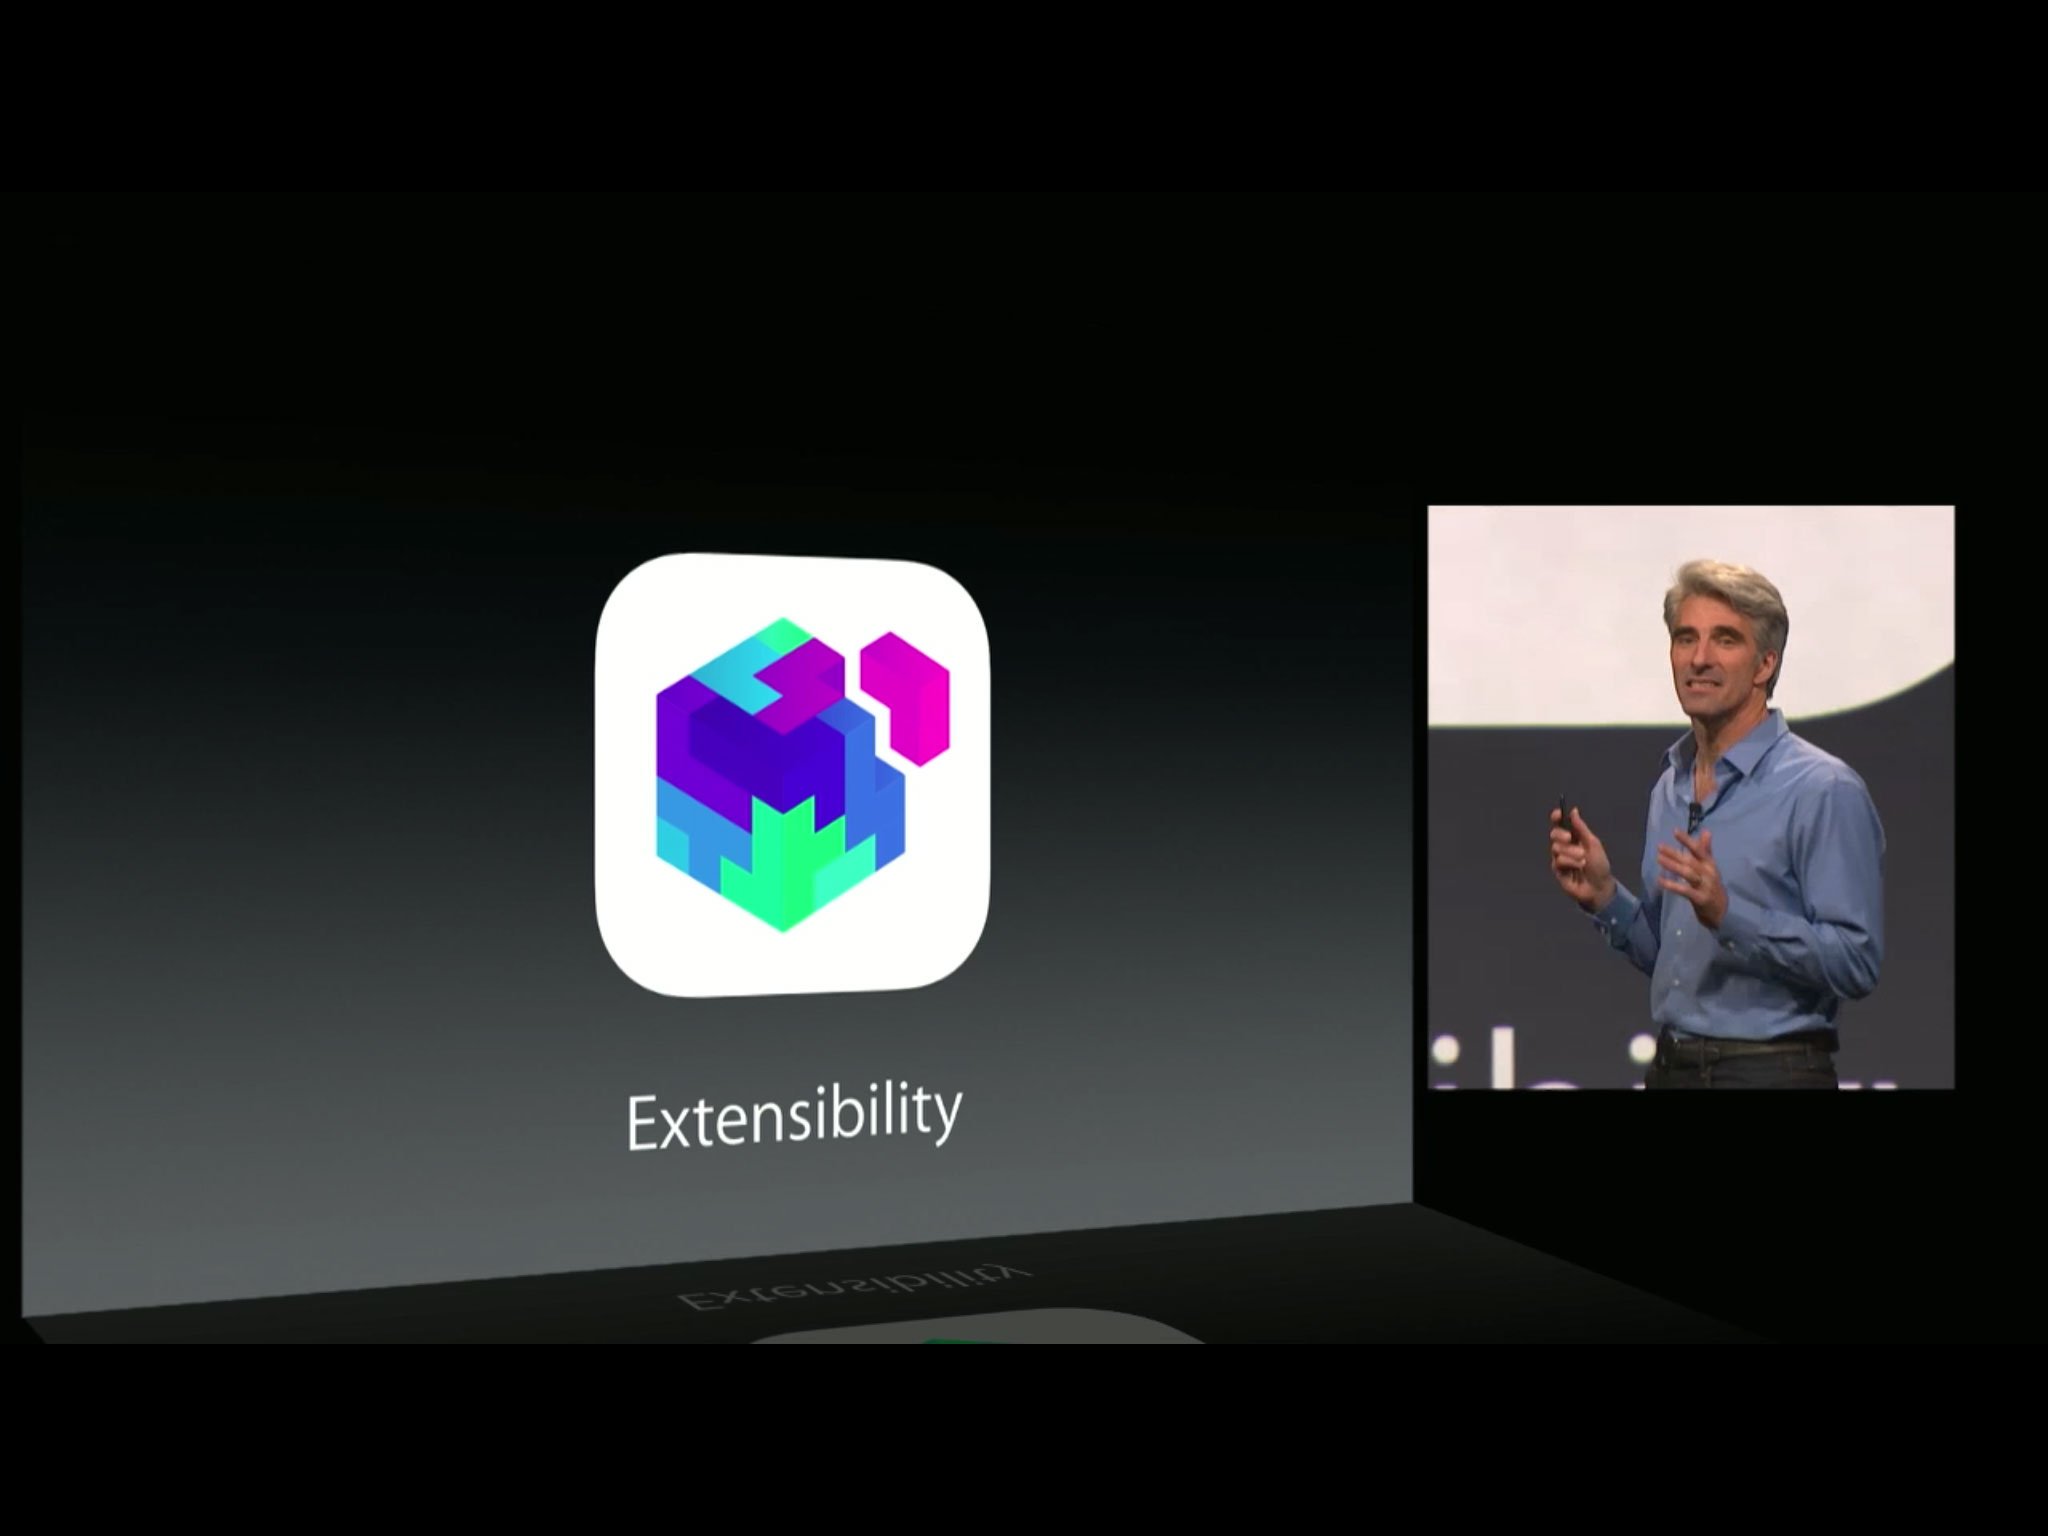 Extensibility in iOS 8: Explained